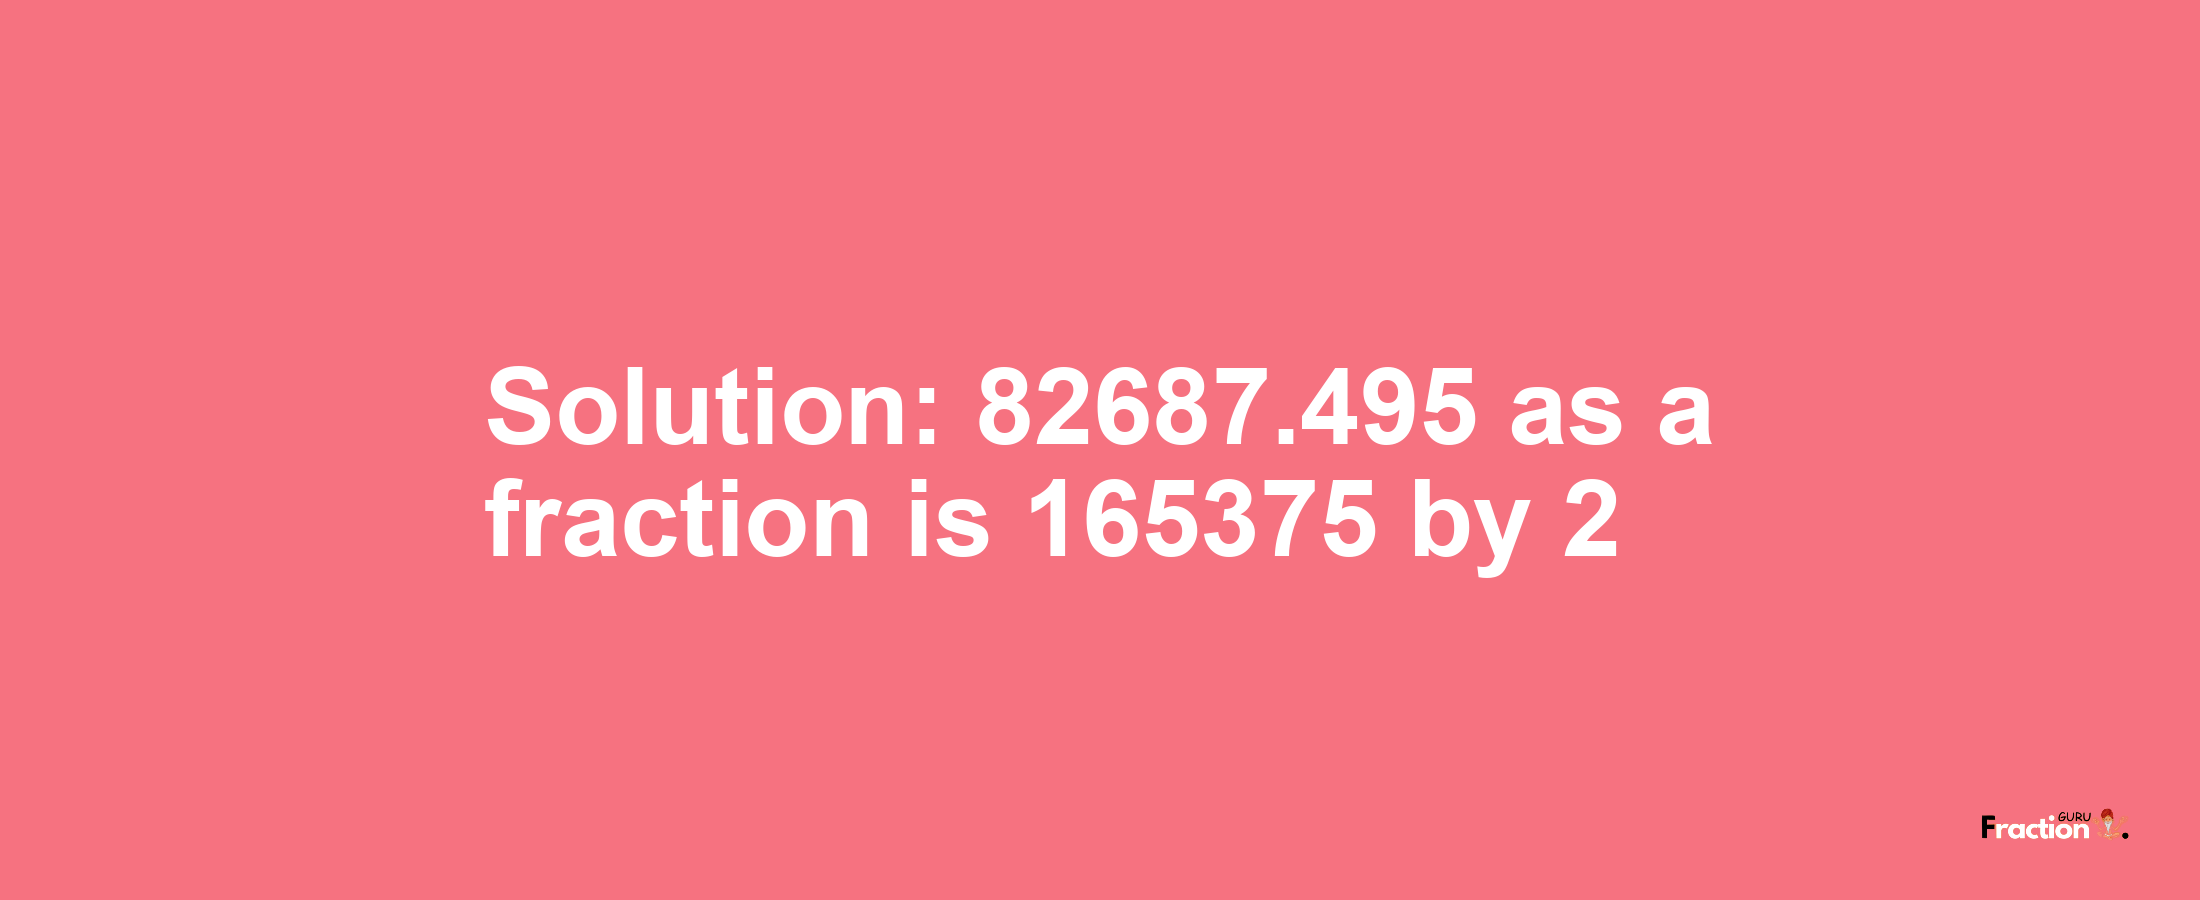 Solution:82687.495 as a fraction is 165375/2